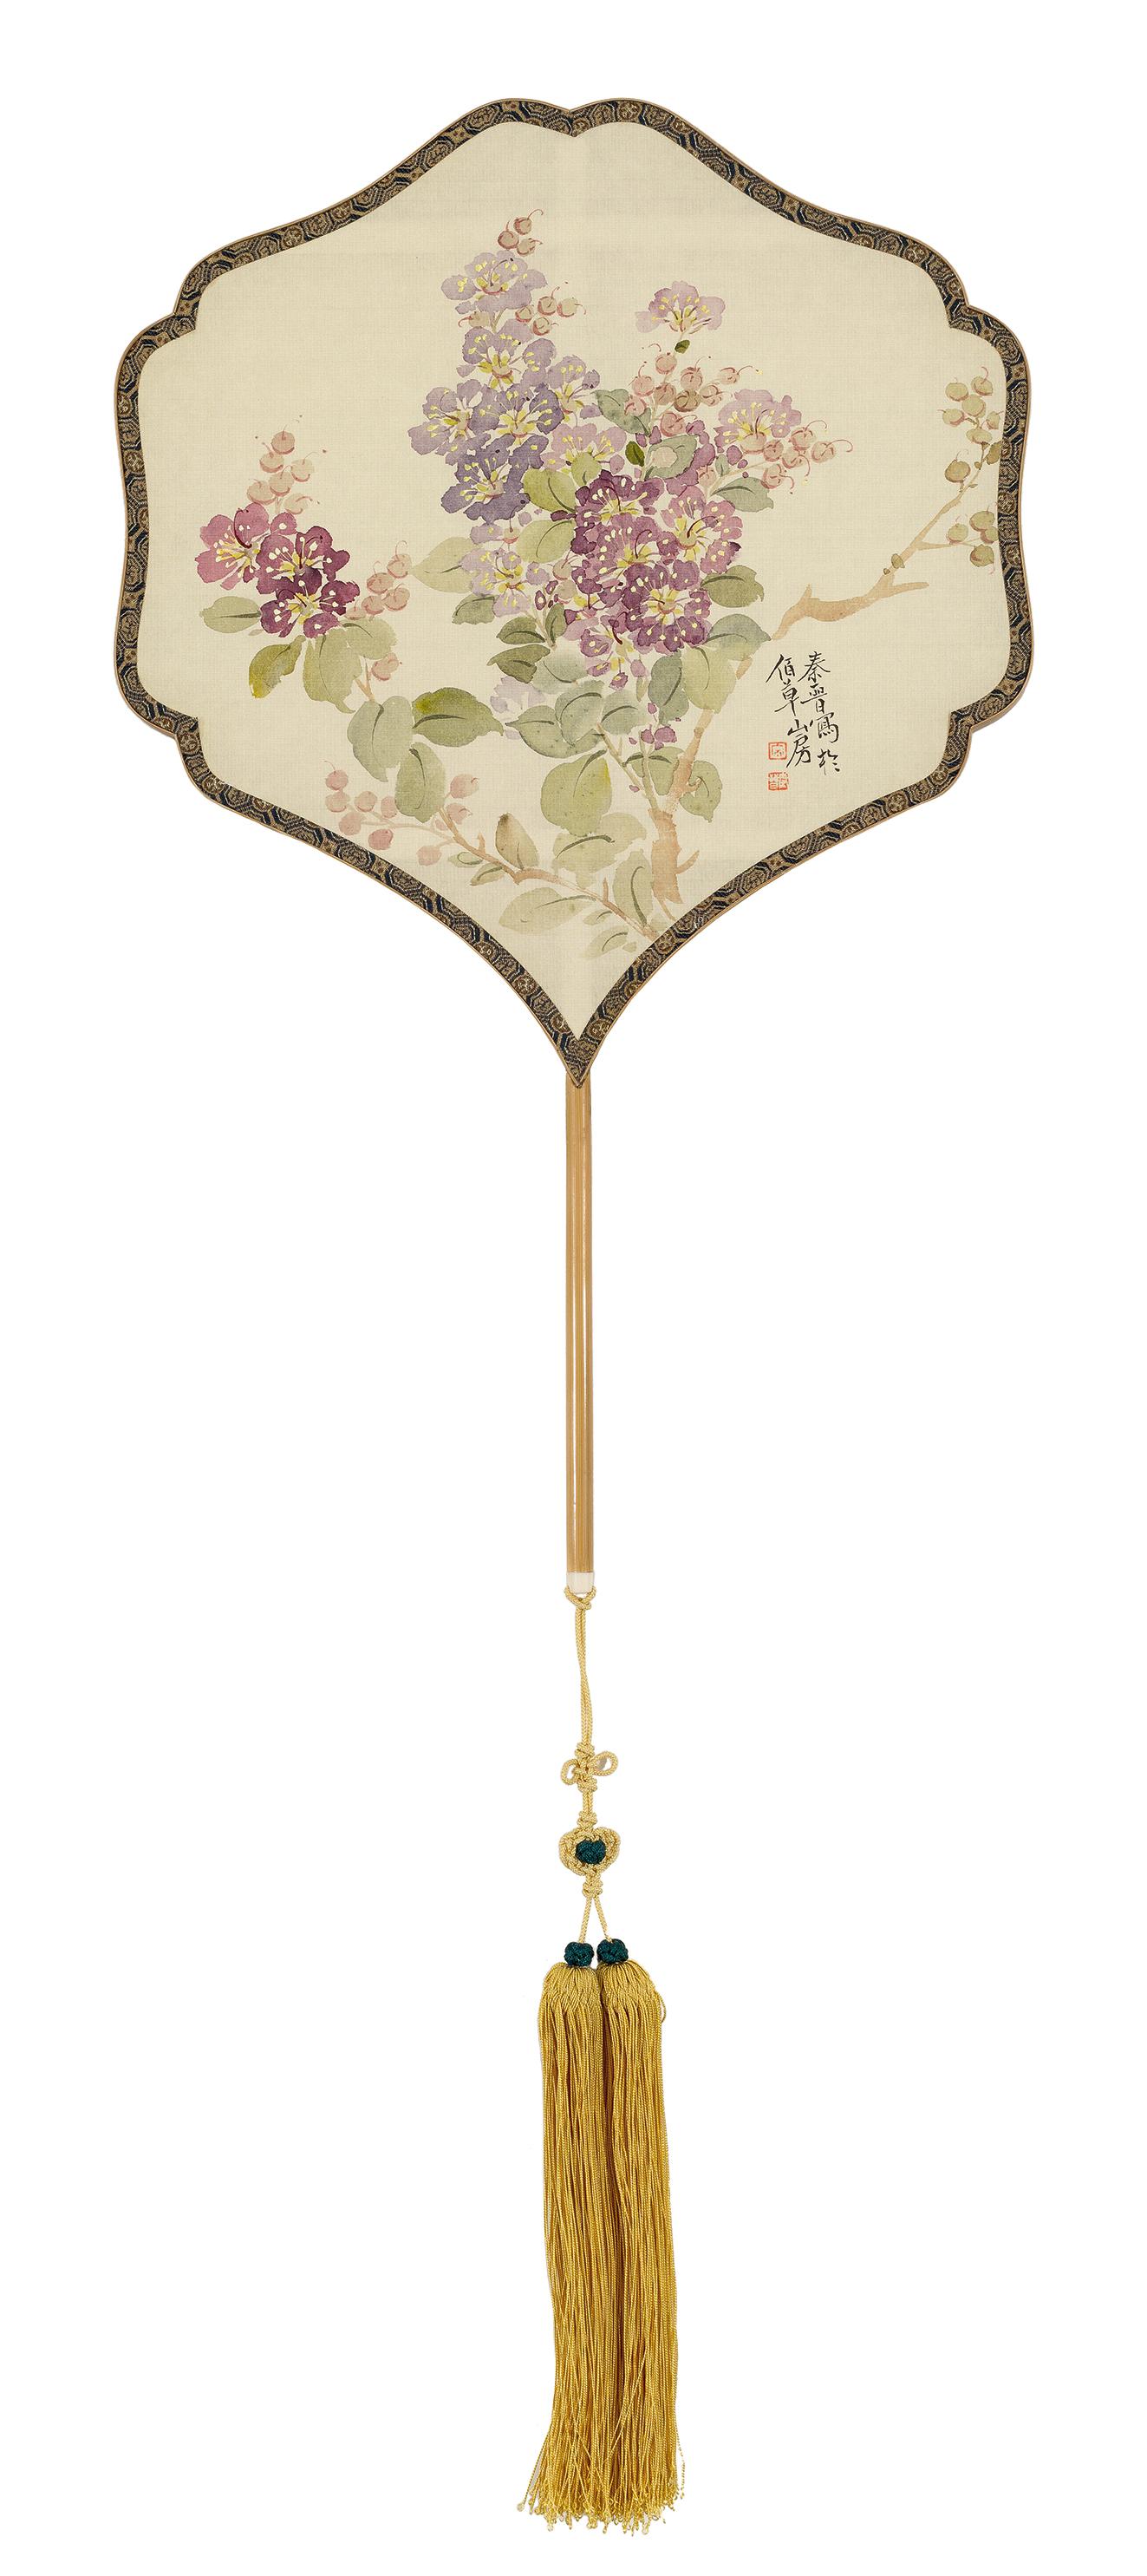 Qinjin Song Still-Life - Lagerstroemia in Bloom (紫薇花开)  - Hand Painted Silk Fan with Bamboo Handle